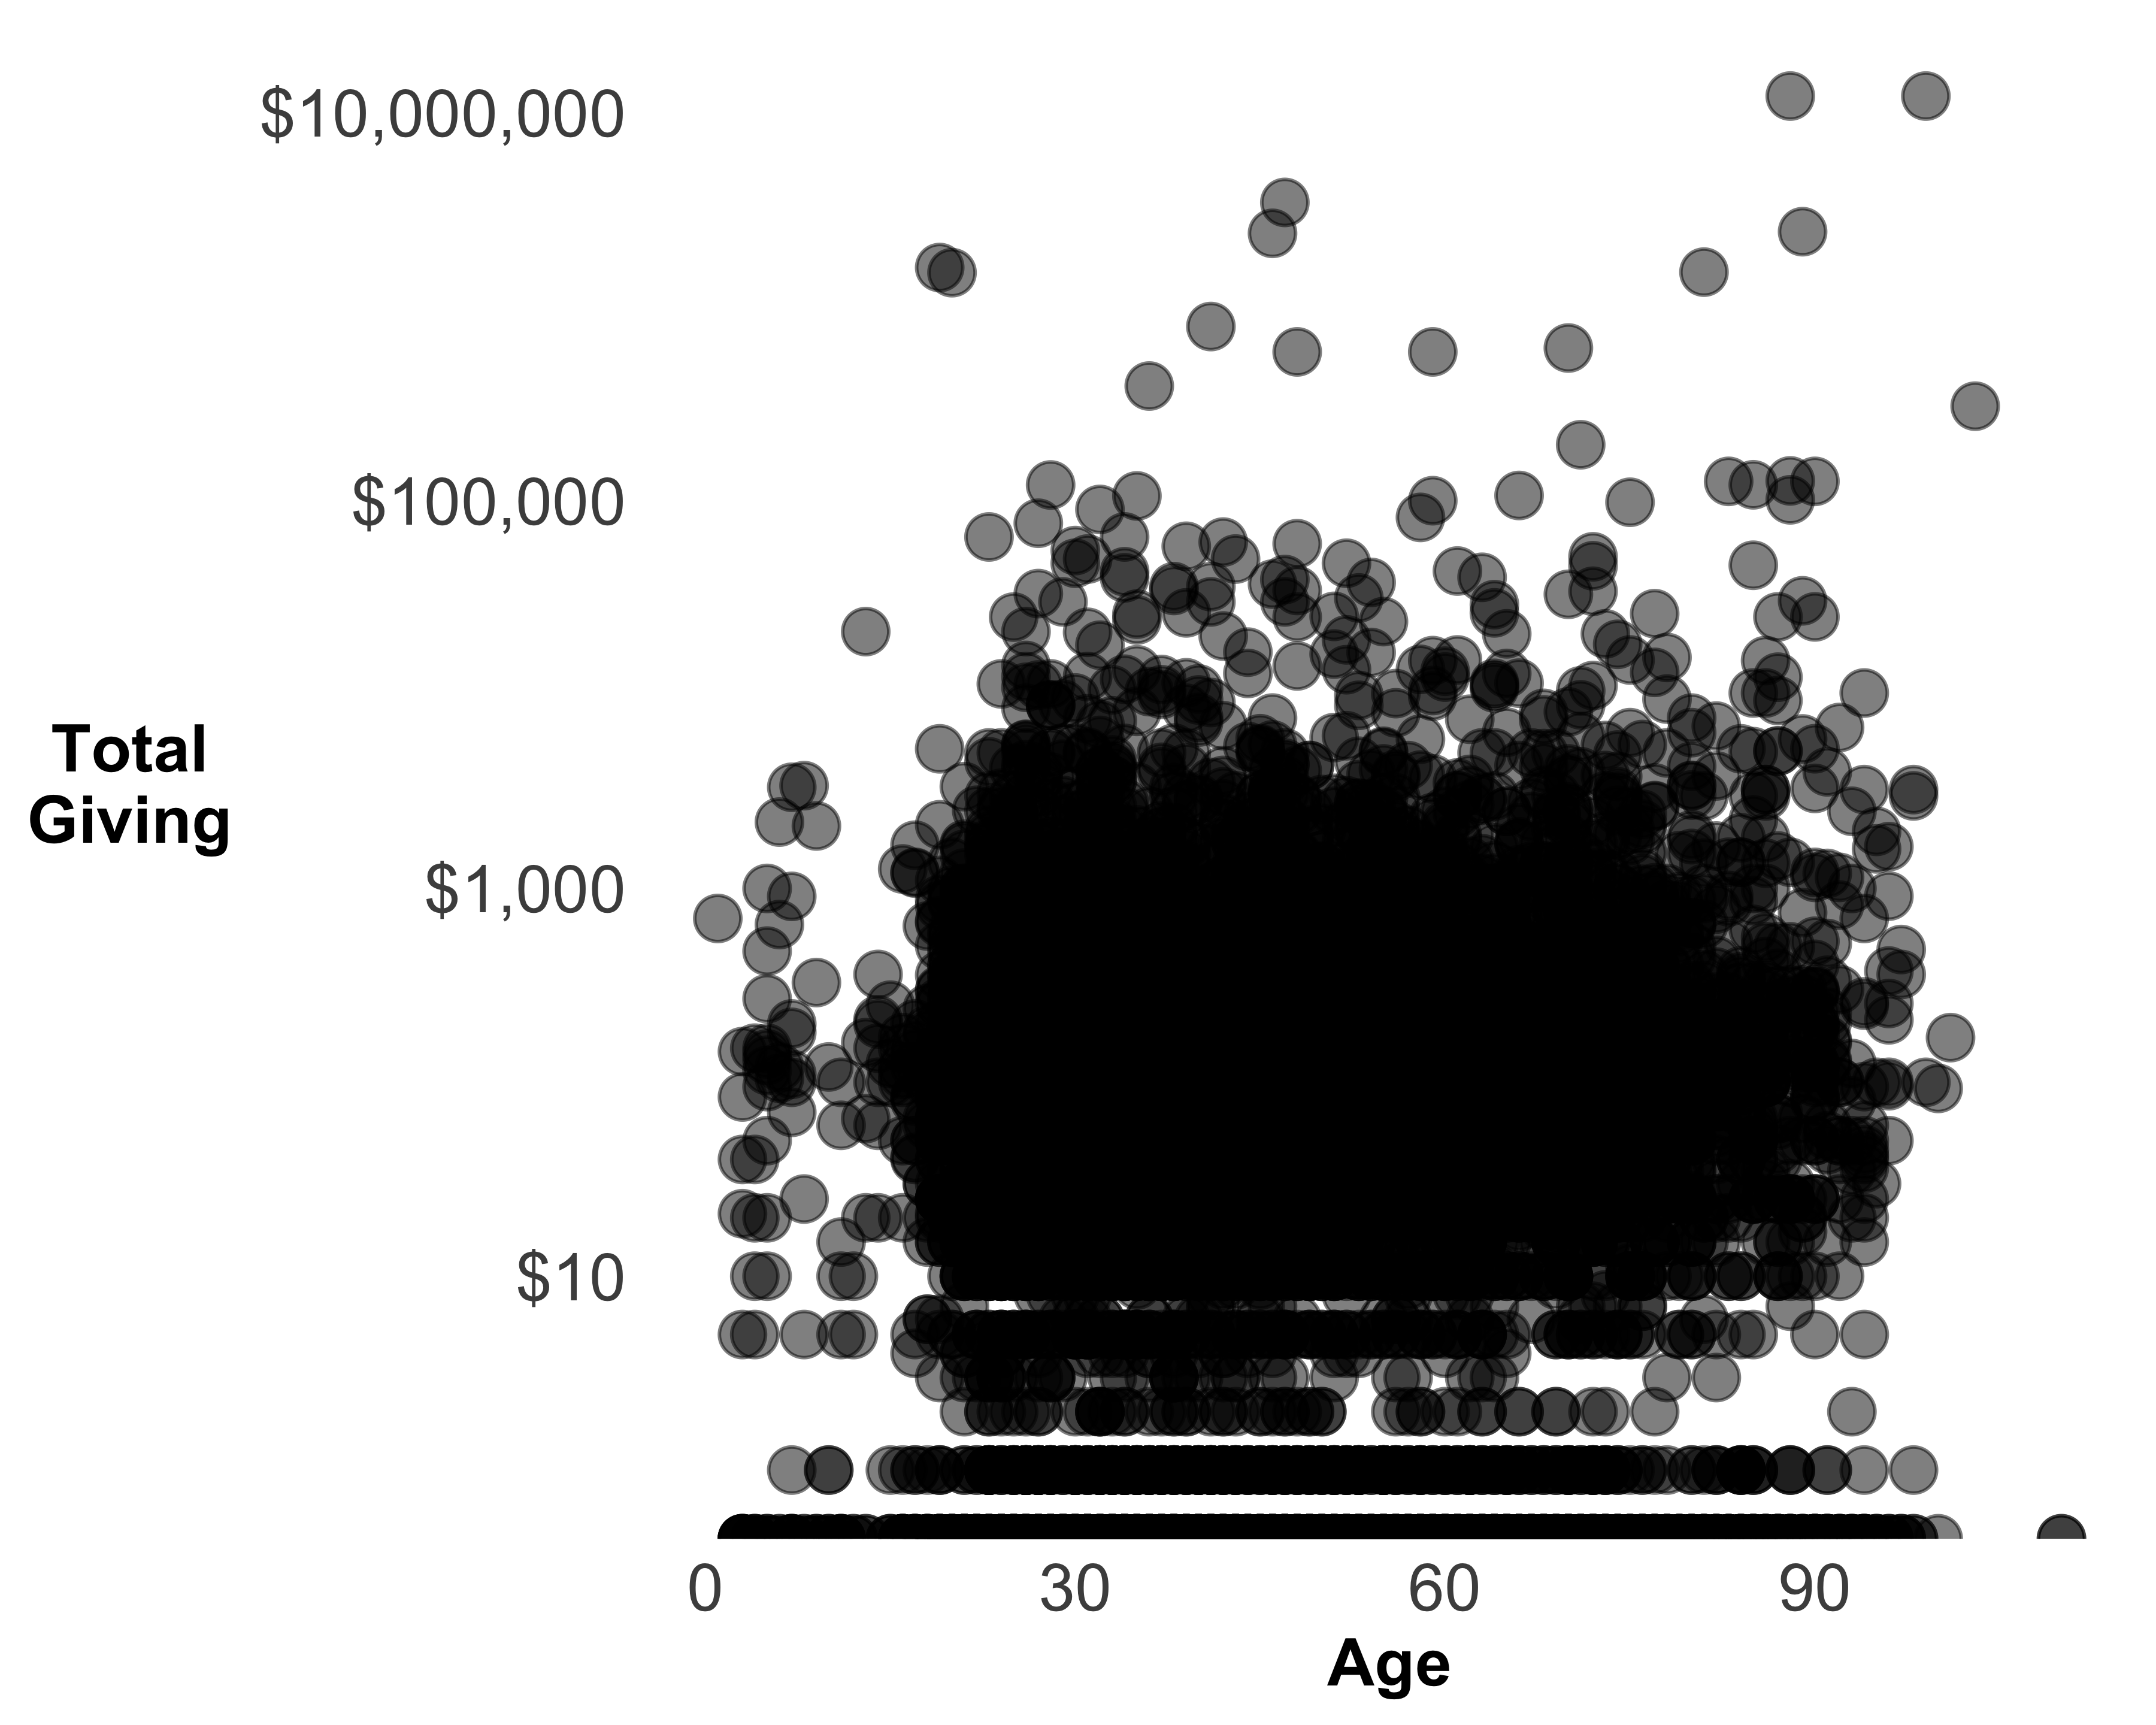 A scatter plot of age and total giving with transparency